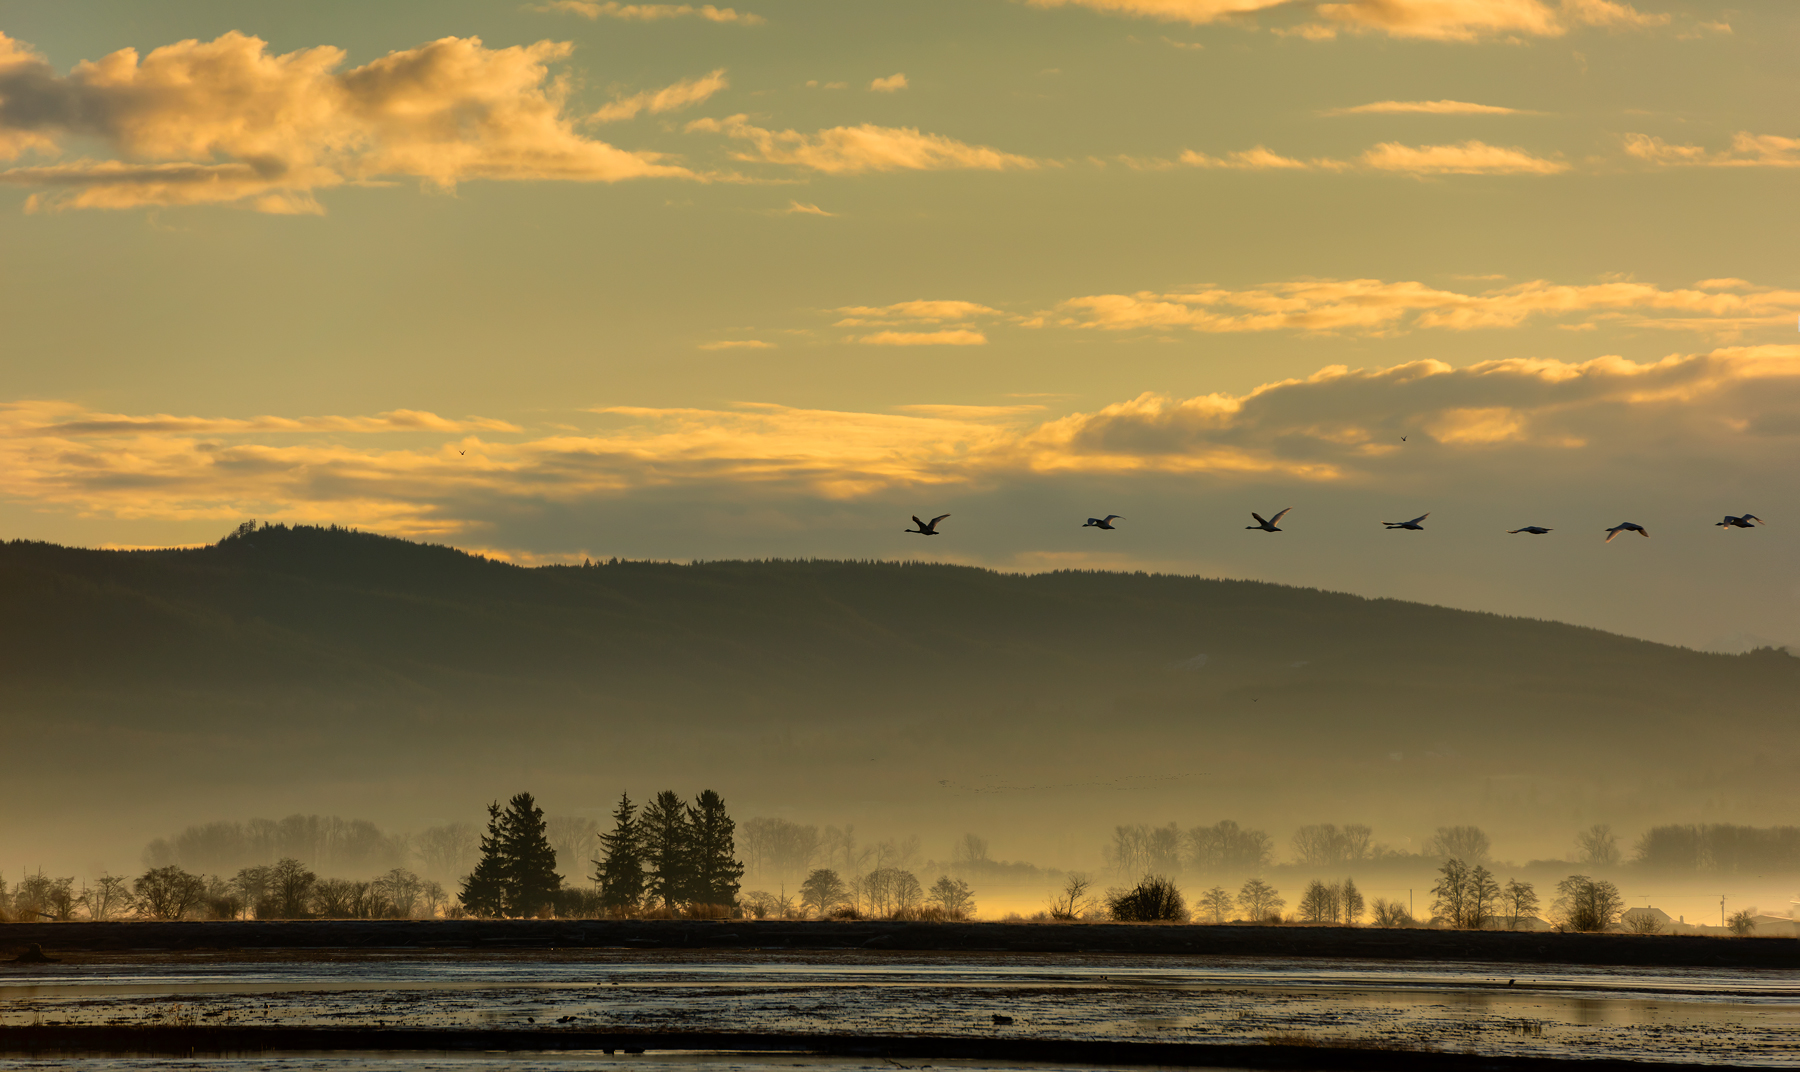  Sunrise at Skagit Valley by Peter Cheung